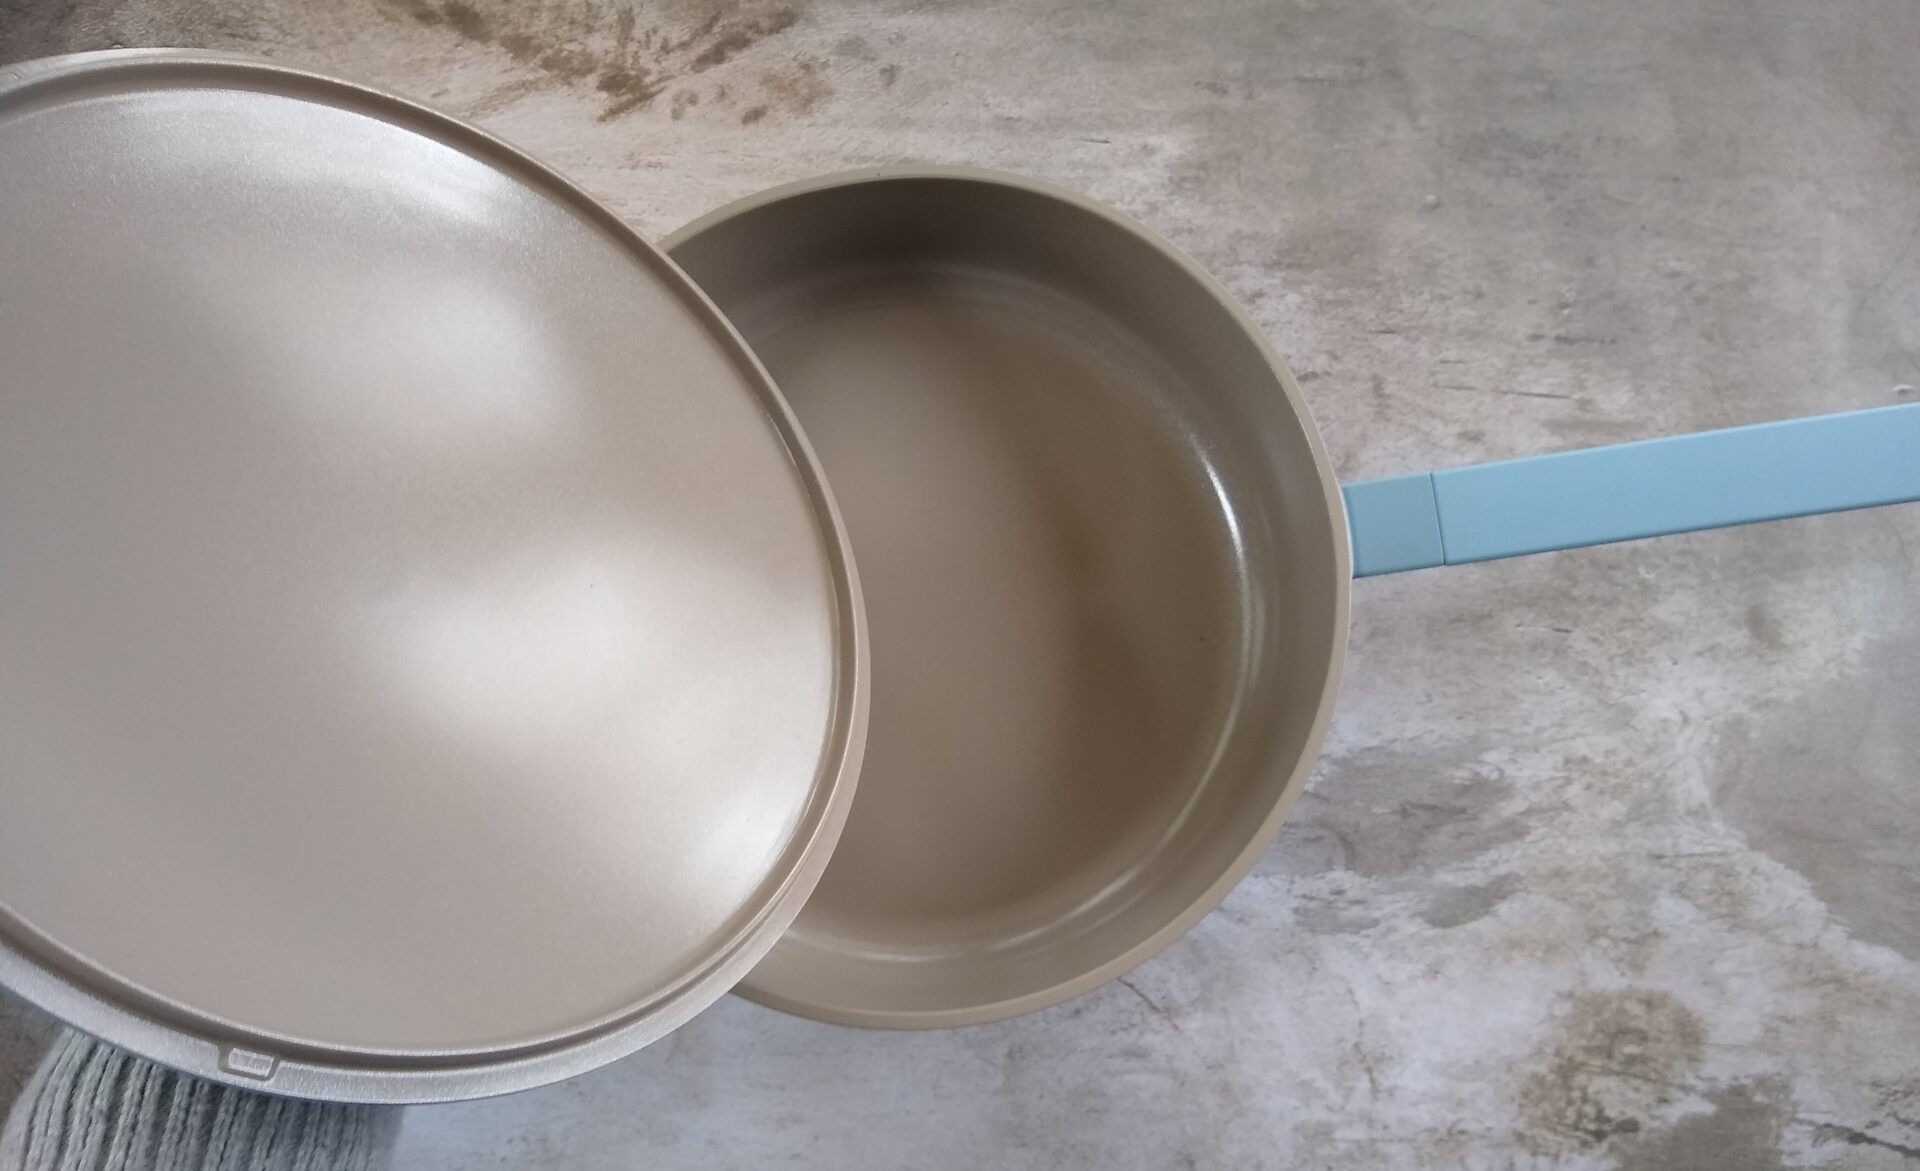 This £14.99 frying pan from Aldi is a time-saving must